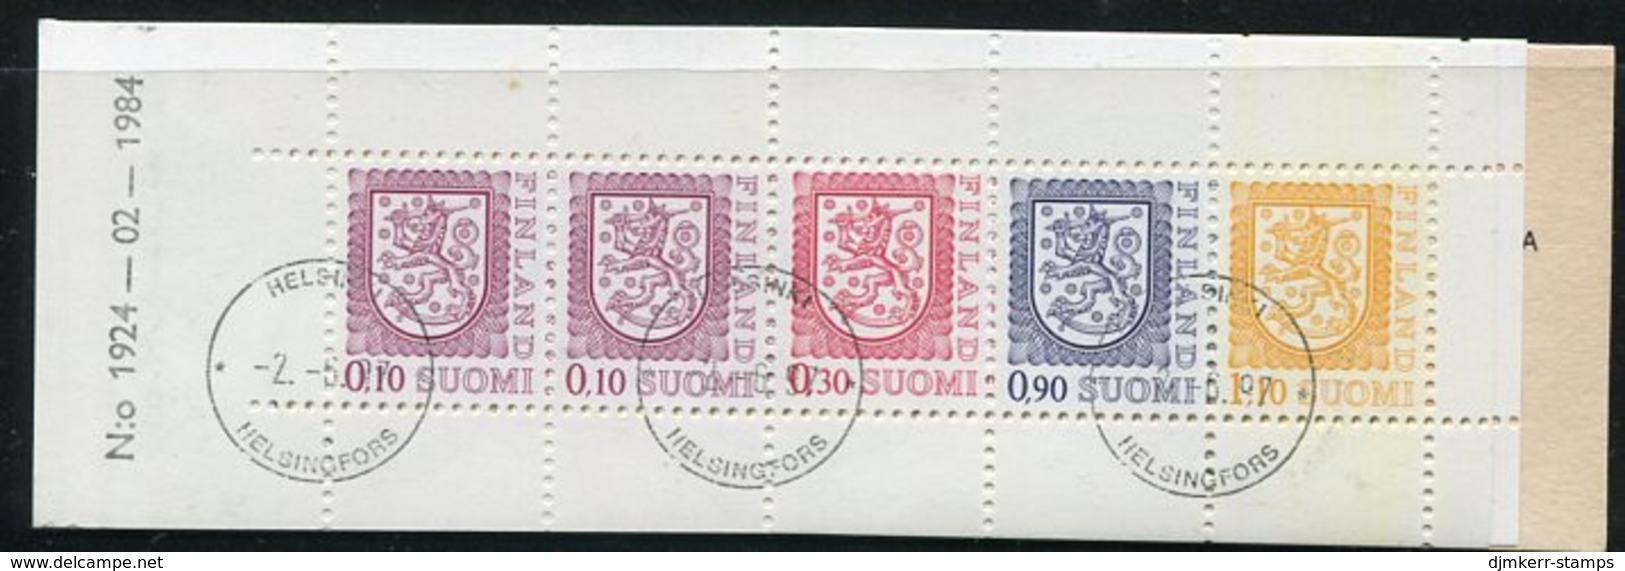 FINLAND 1980 Lion Definitive Type II 5 Mk. Complete, Cancelled.  Michel MH 12 II - Carnets